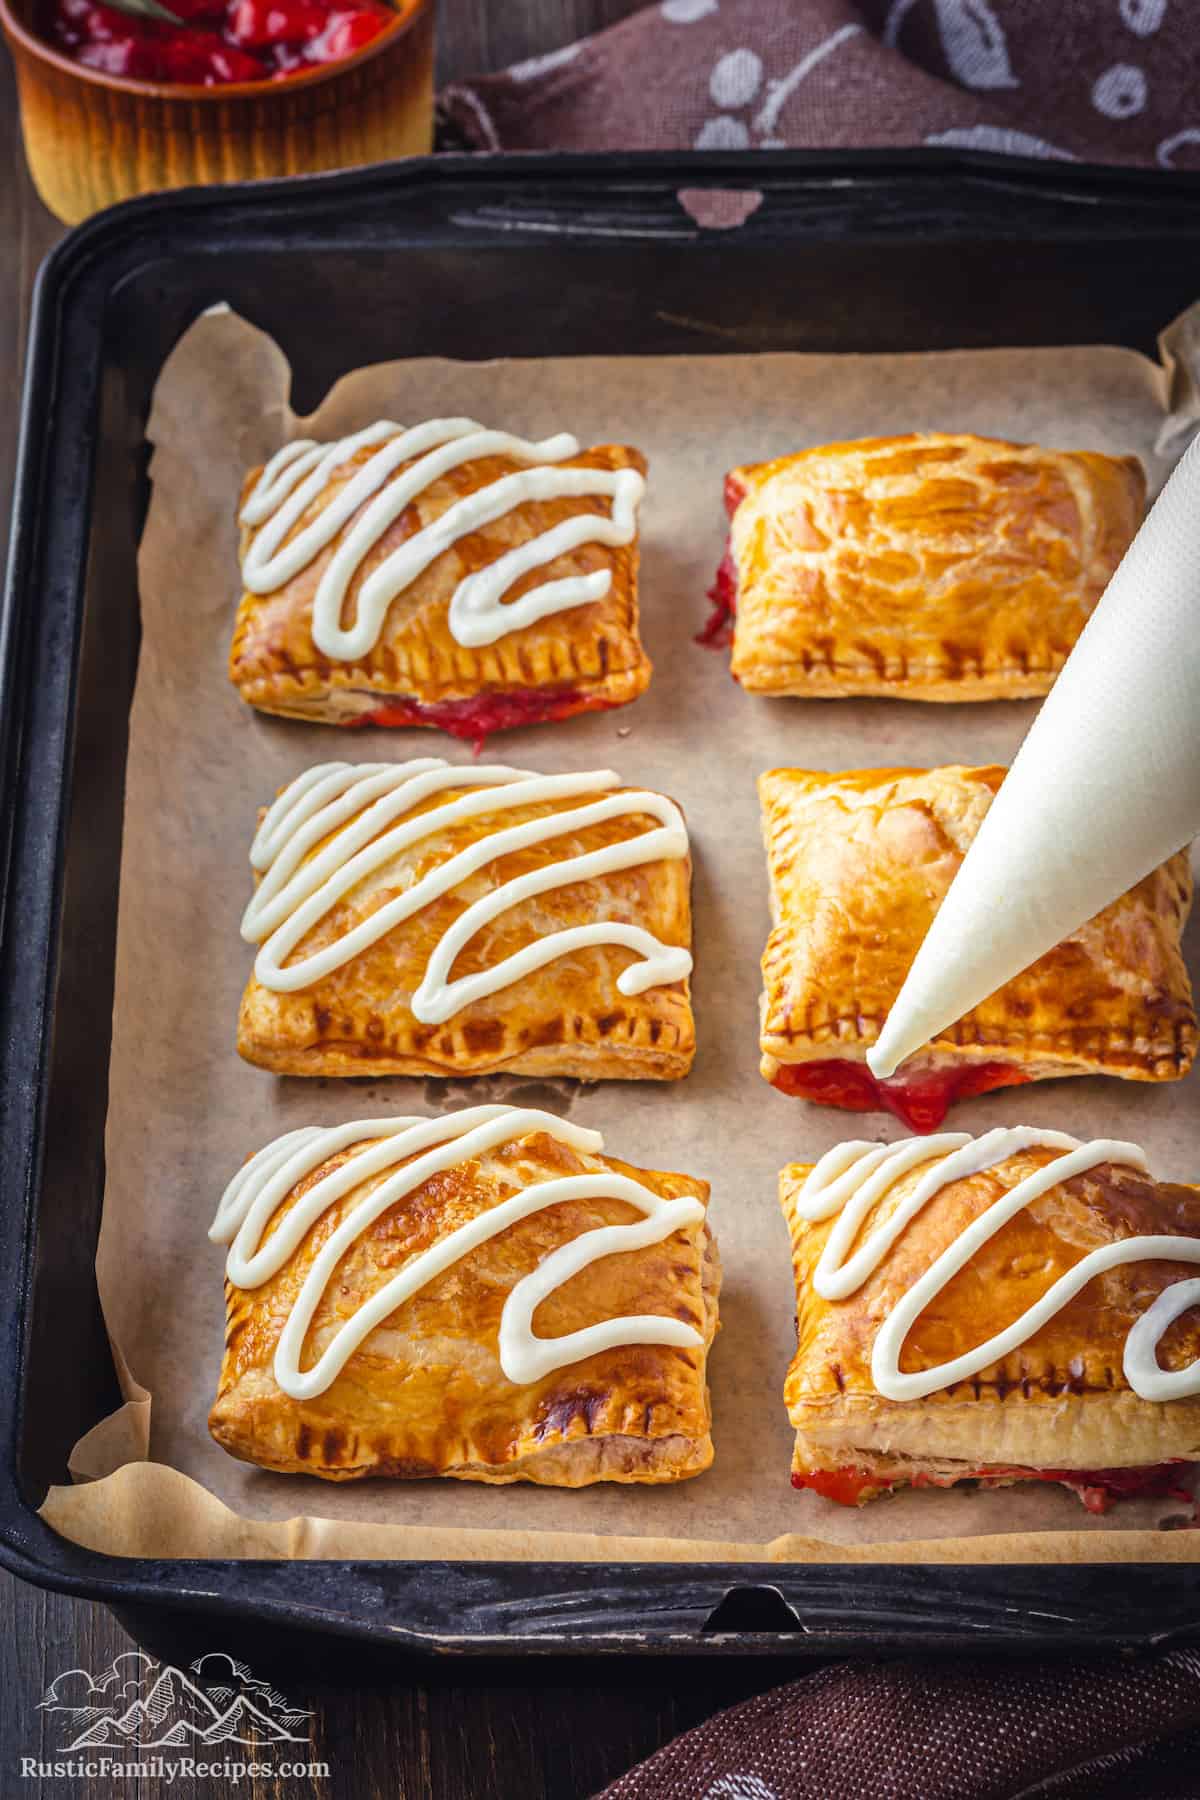 A piping bag is used to pipe squiggles of cream cheese frosting on top of baked strawberry toaster strudels on a baking sheet.